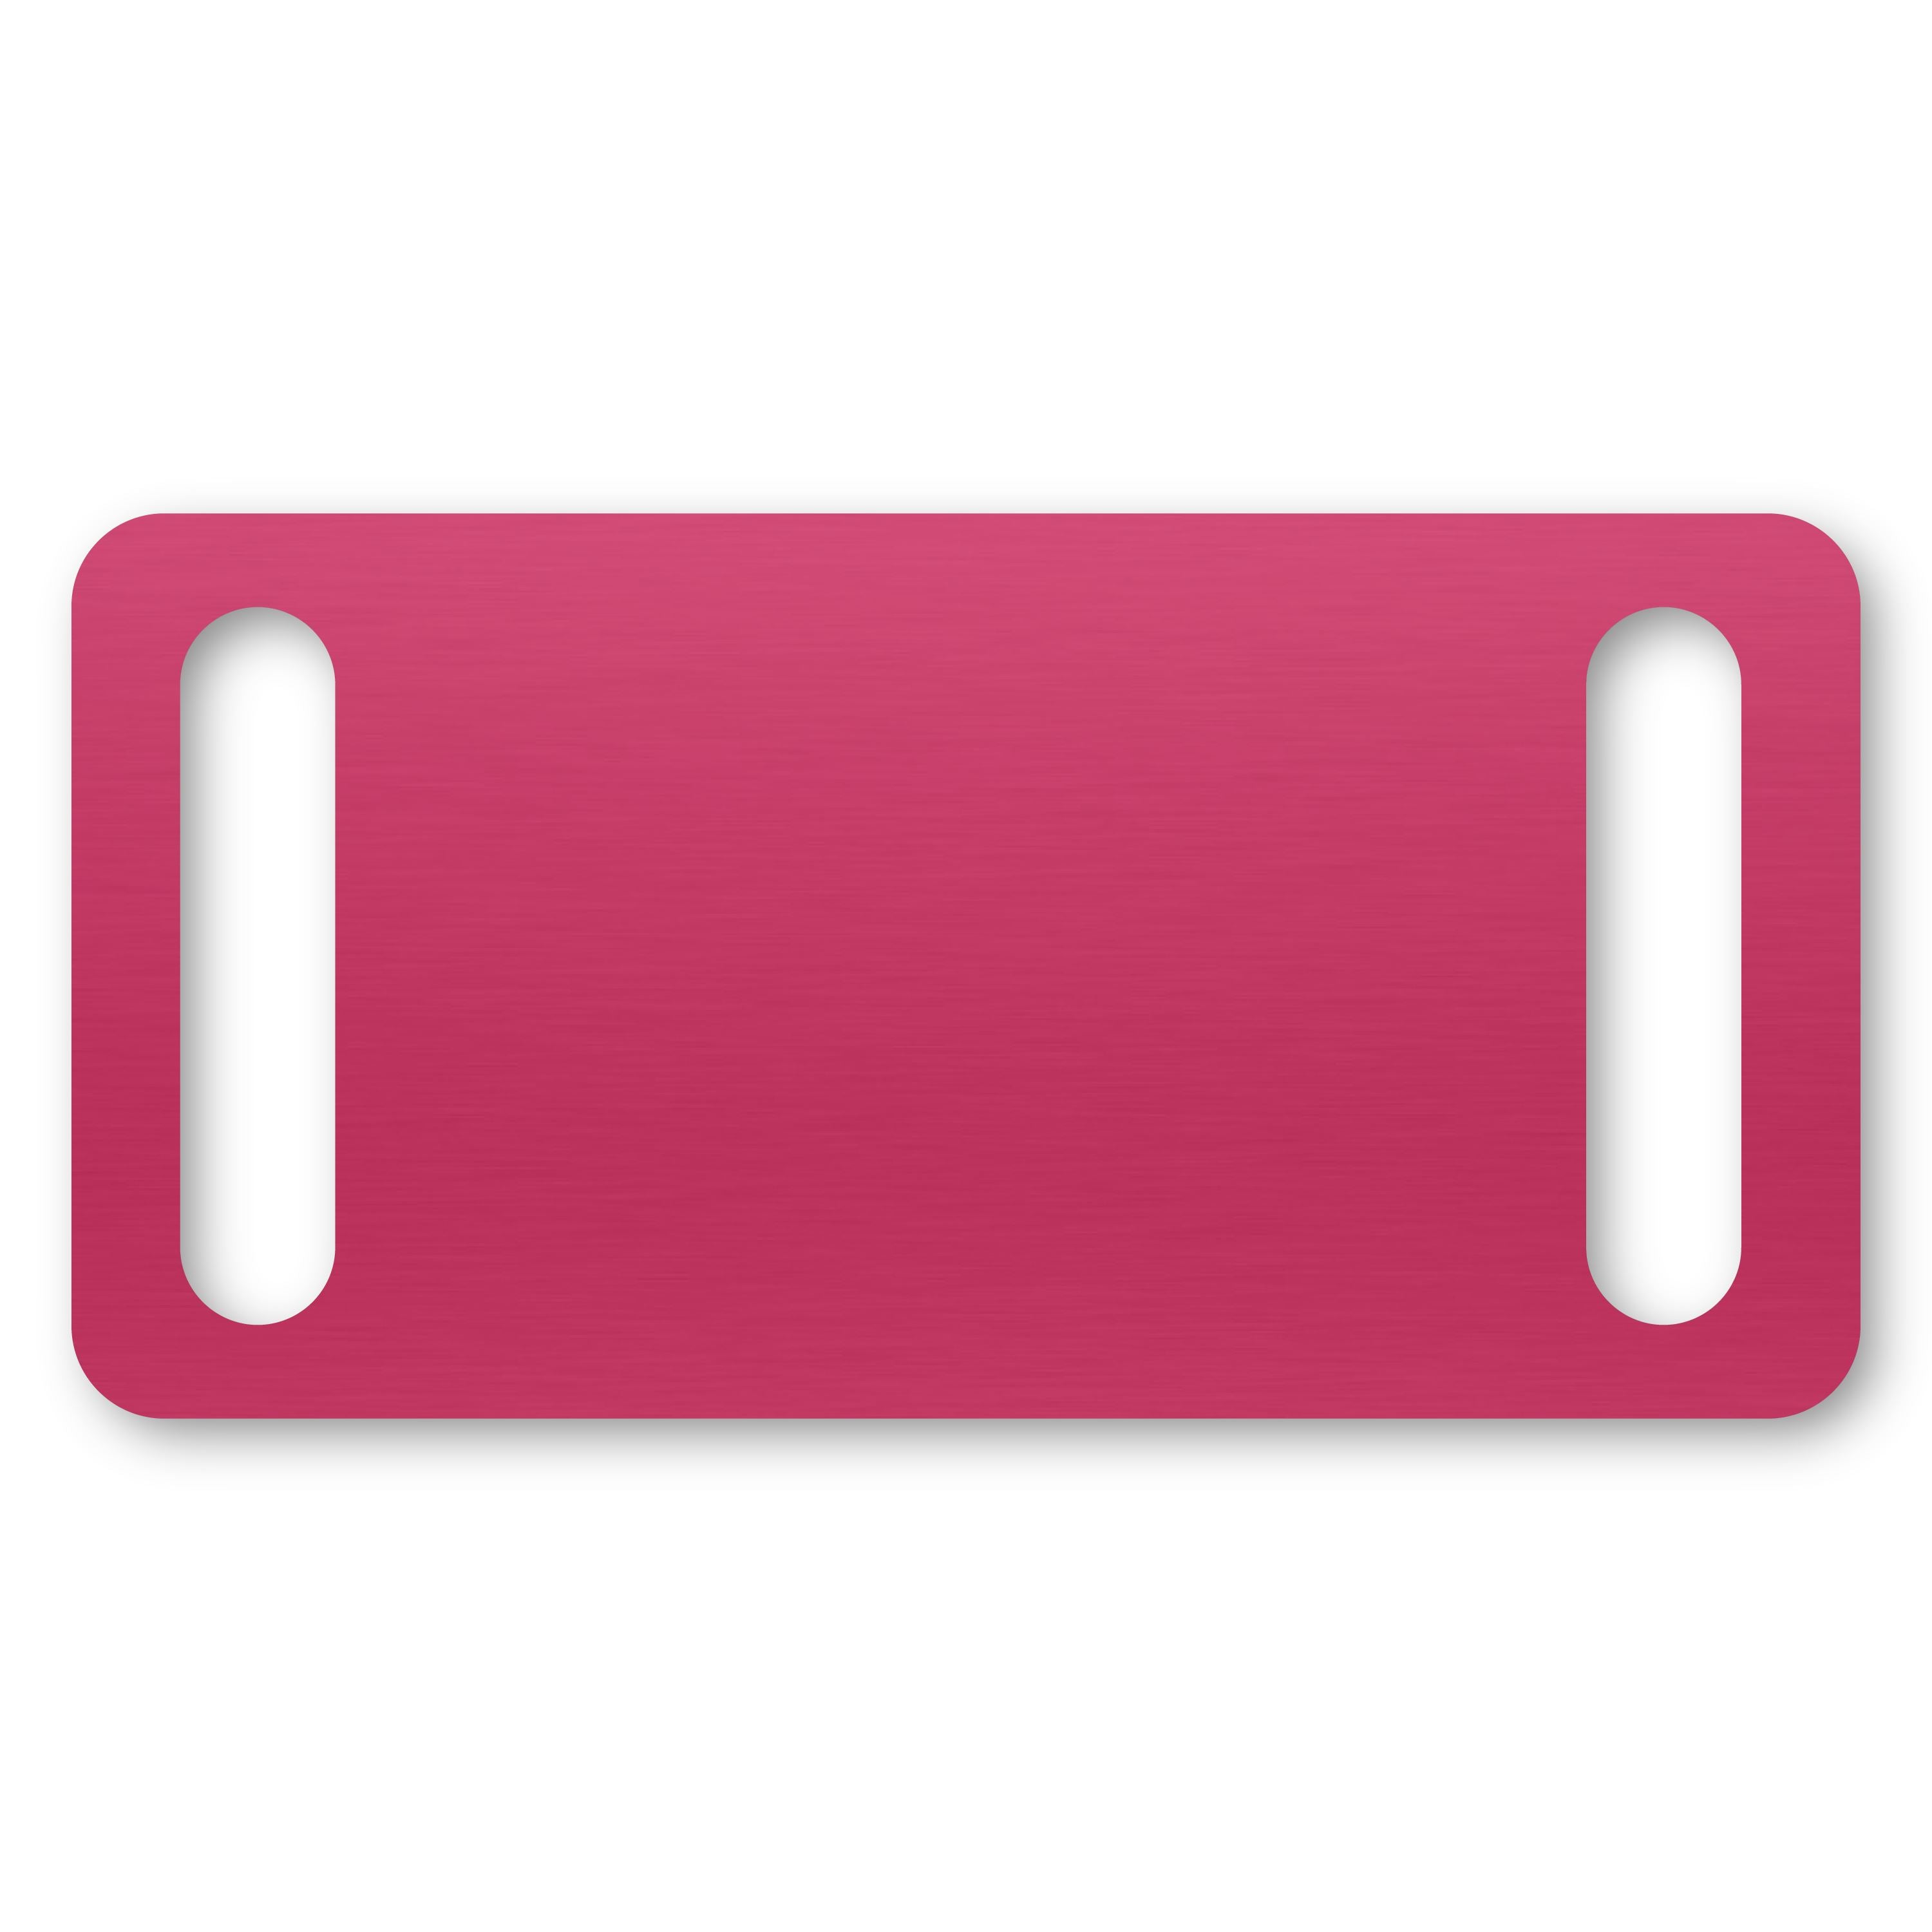 Anodized Aluminum Rectangle Slide-On Tags, 1-3/16" x 2" with 1/4" x 1" Slot, Laser Engraved Metal Tags Craftworks NW Pink 